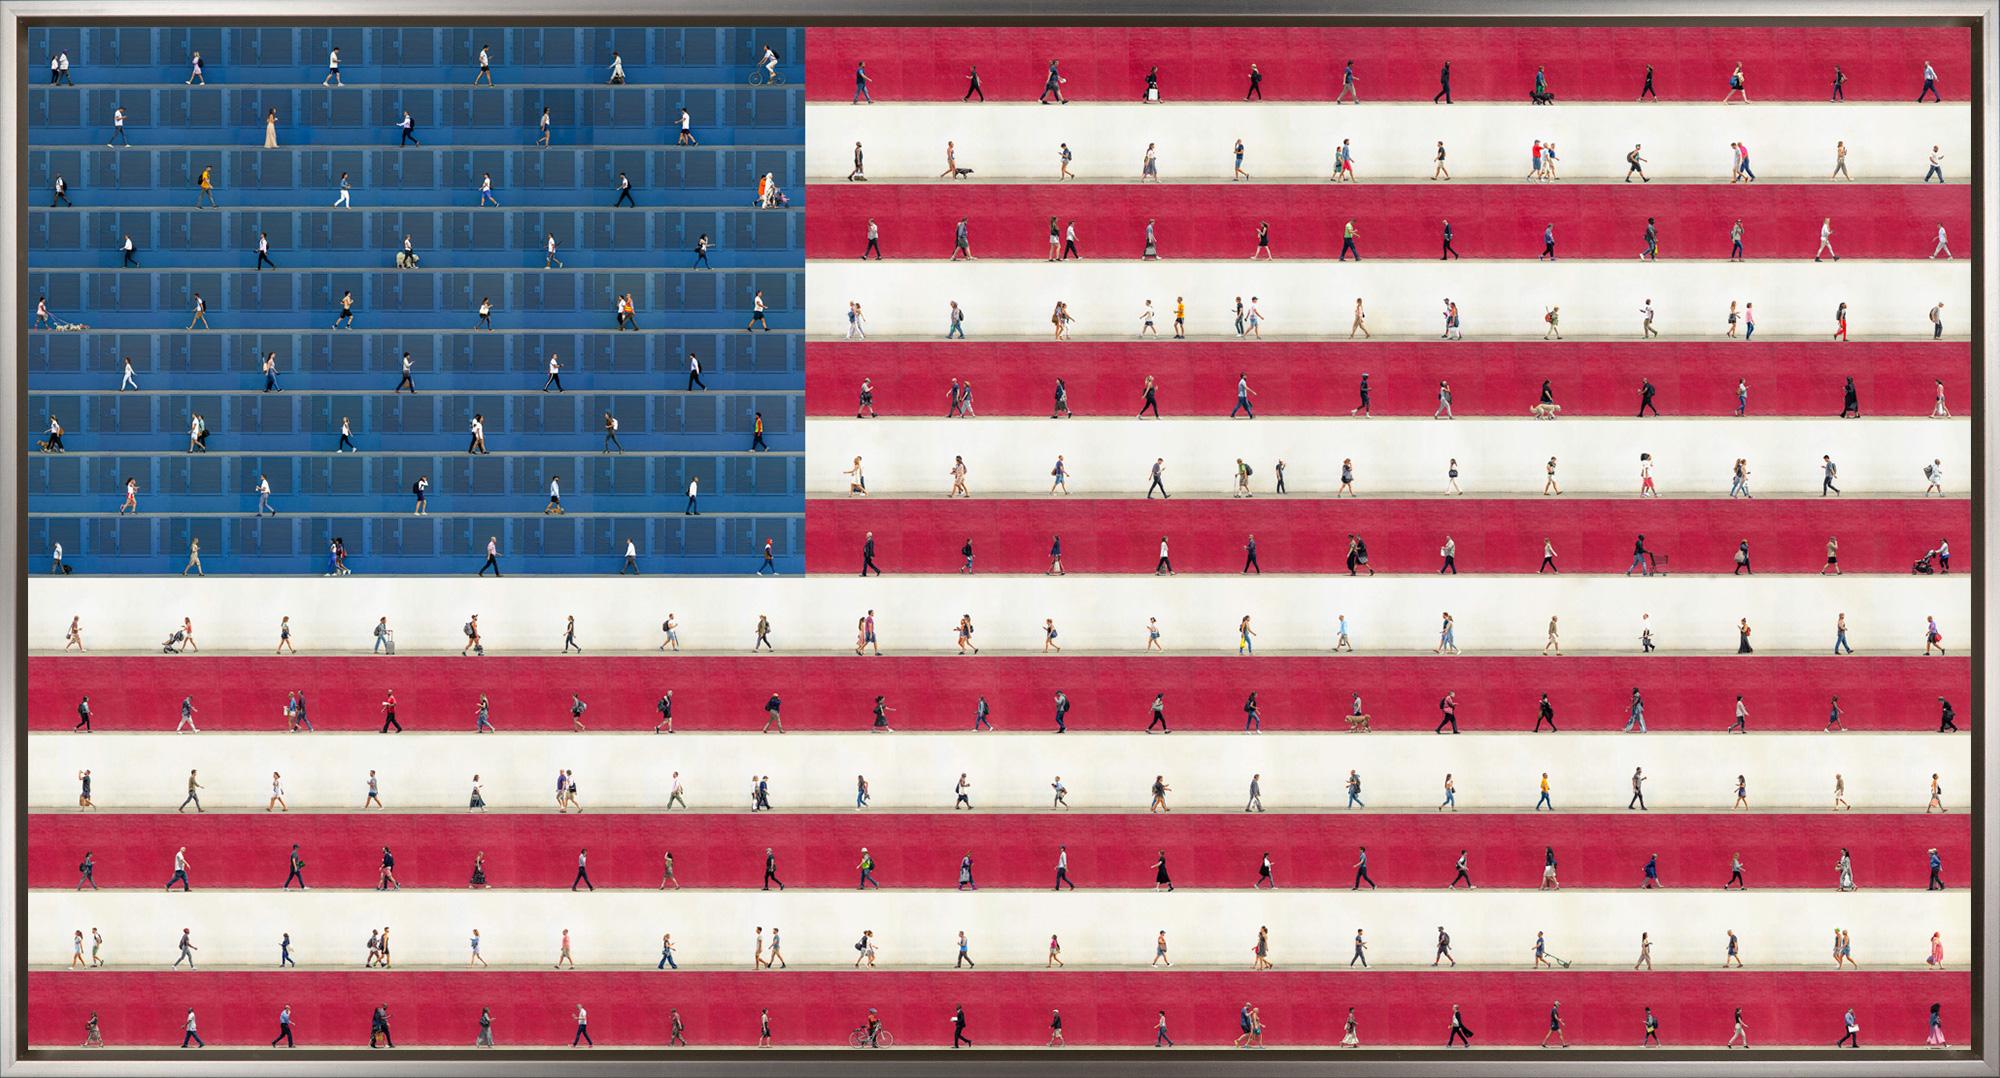 "We the People" is a framed photograph on aluminum by Xan Padron, depicting a compilation of walking figures arranged to create an American flag. Padron's signature technique of splicing together individual photographs to craft a larger composition